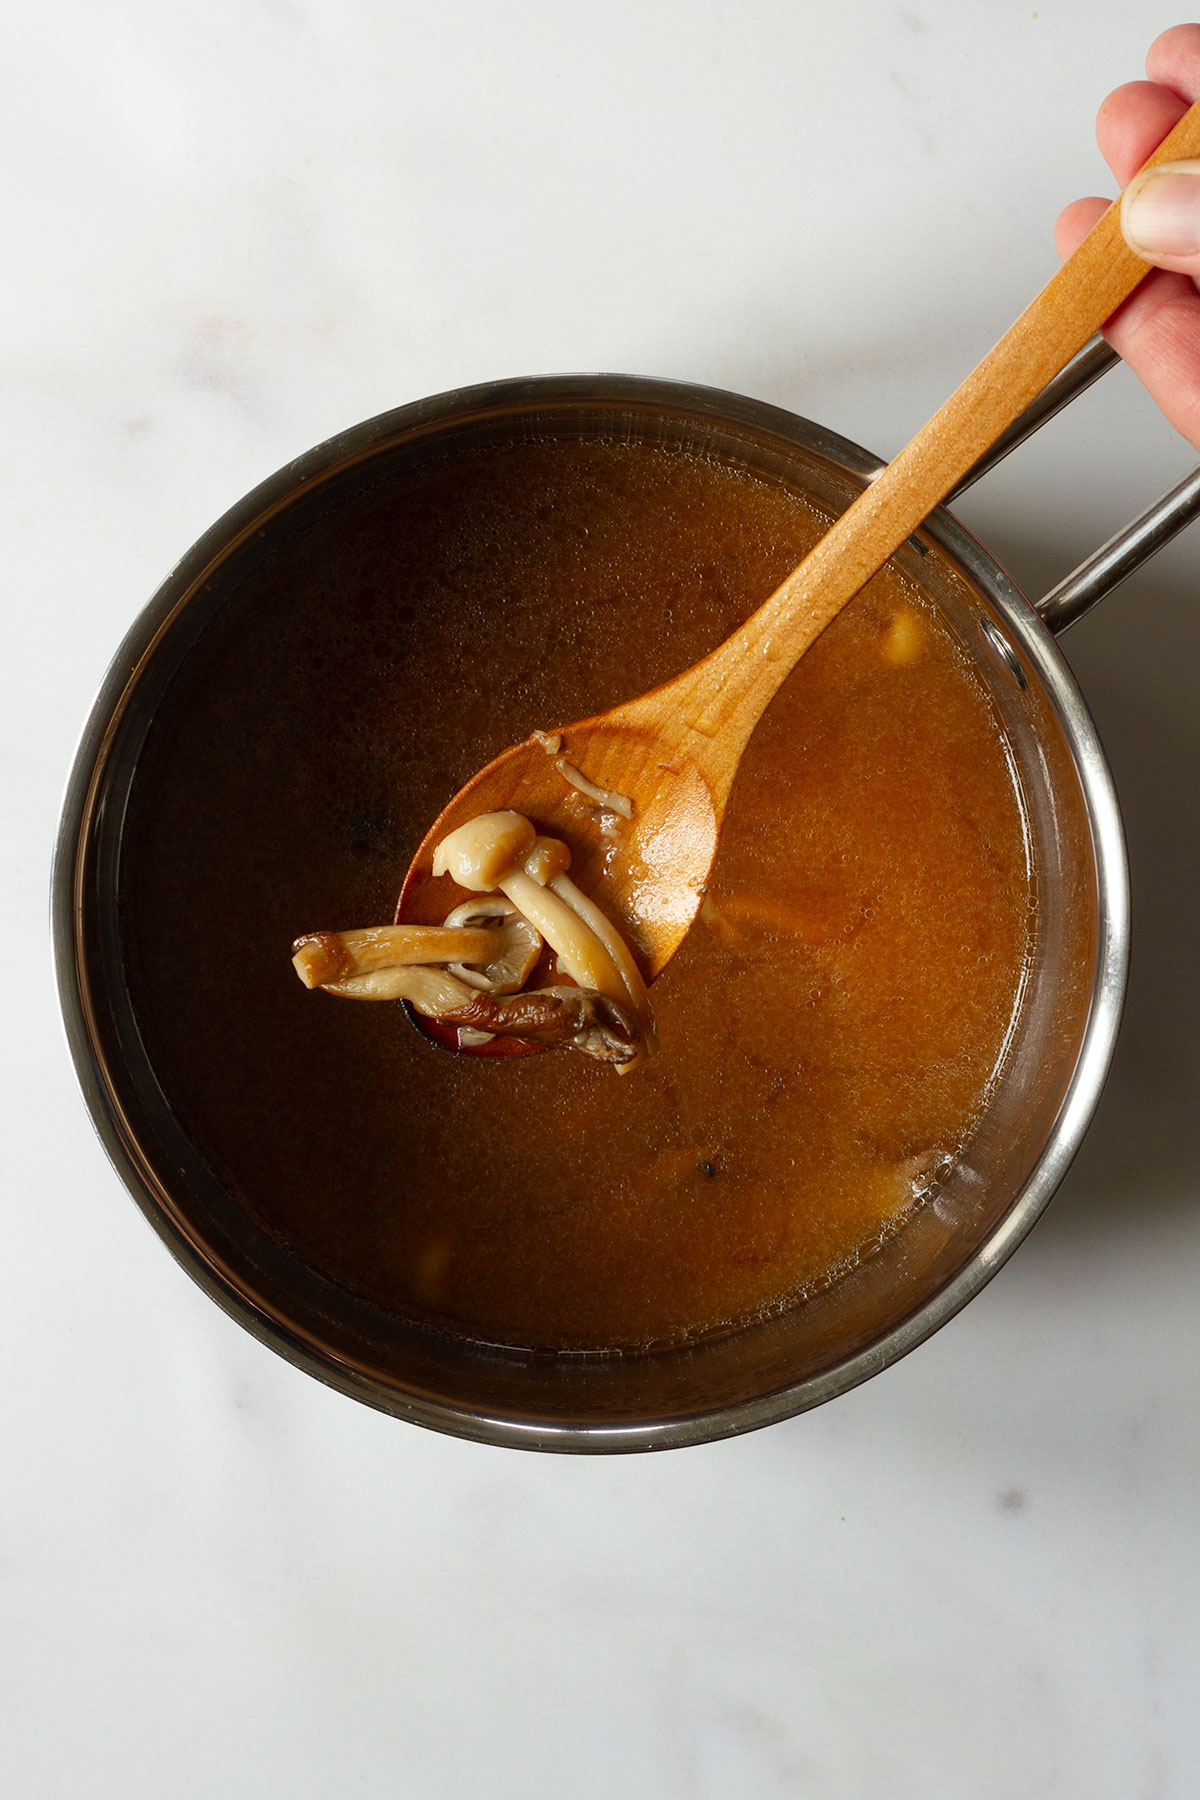 A pan of miso soup with mushrooms added on a white background.